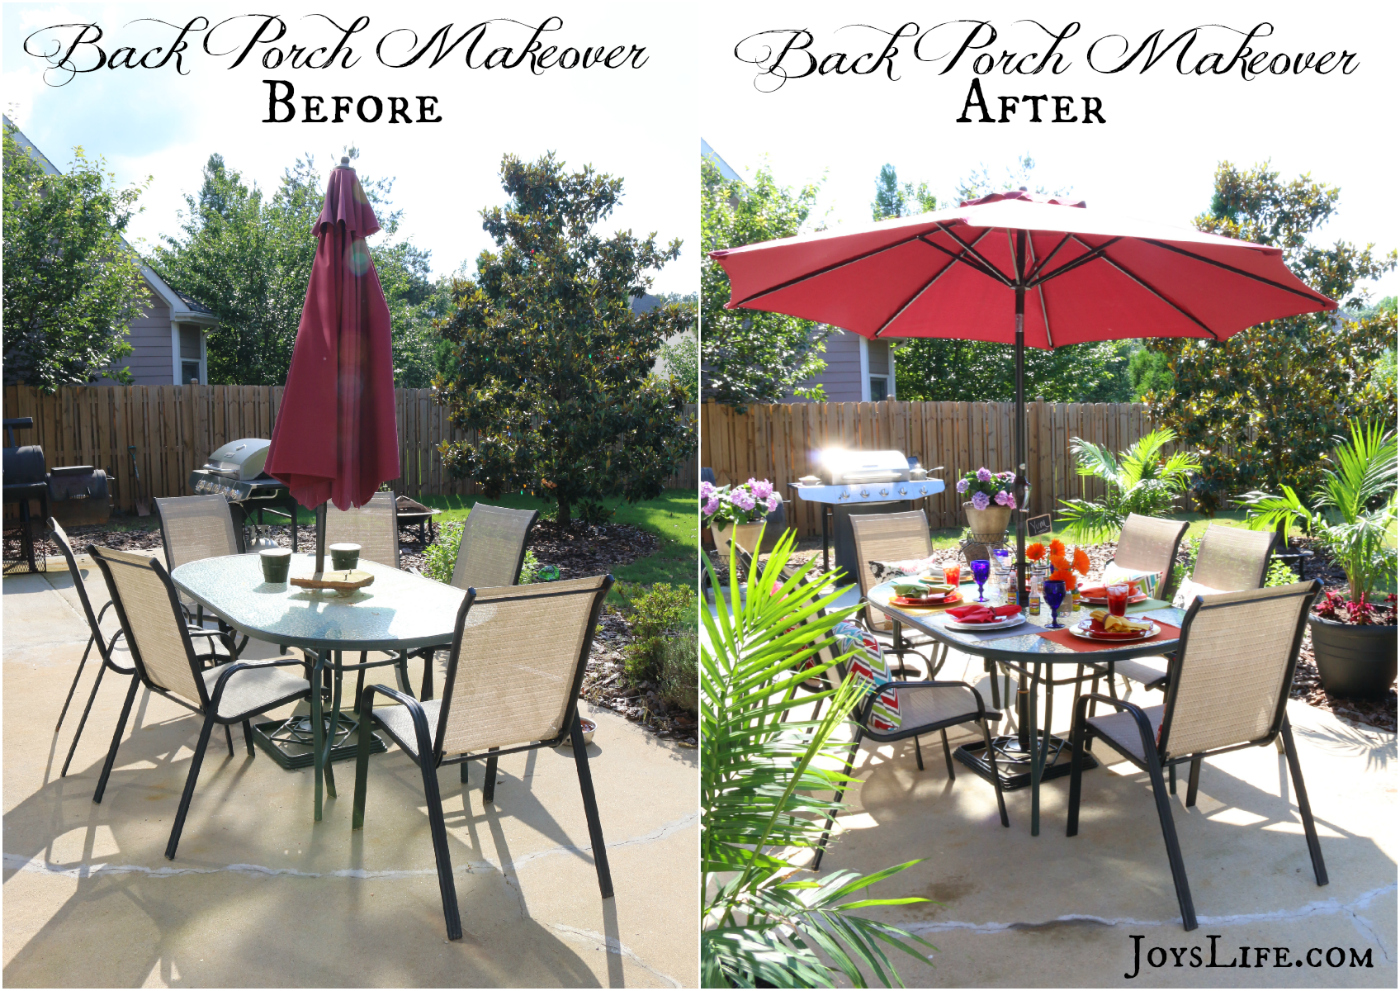 Back Porch Makeover Before and After #KingOfFlavor #Ad